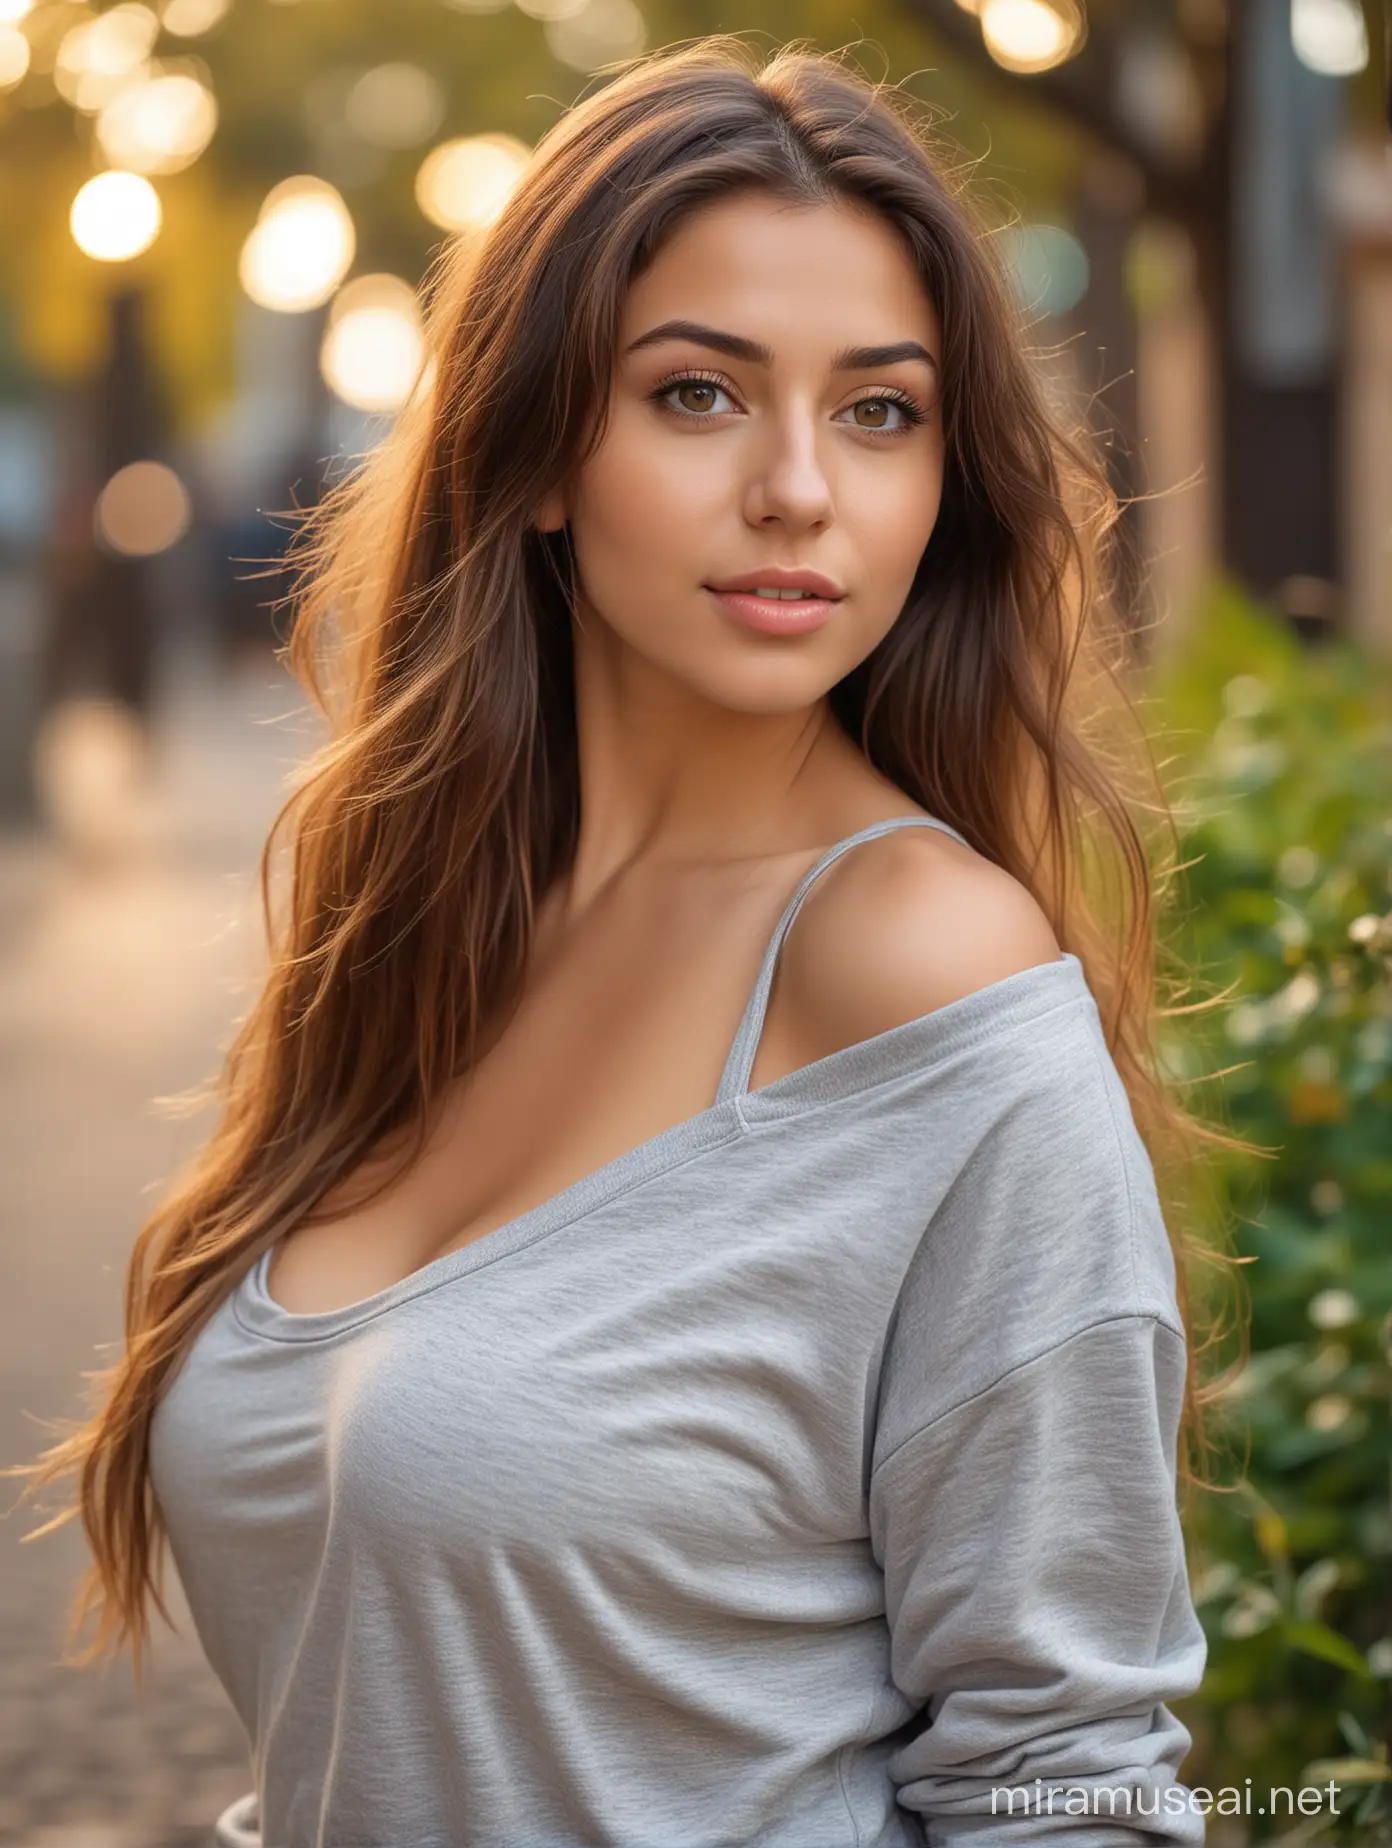 beautiful young woman, long hair over one shoulder, large perfect breasts, dreamy expression, sweatshirt unzipped, cleavage, no undershirt or bra, sexy pose, outdoors, bokeh background
